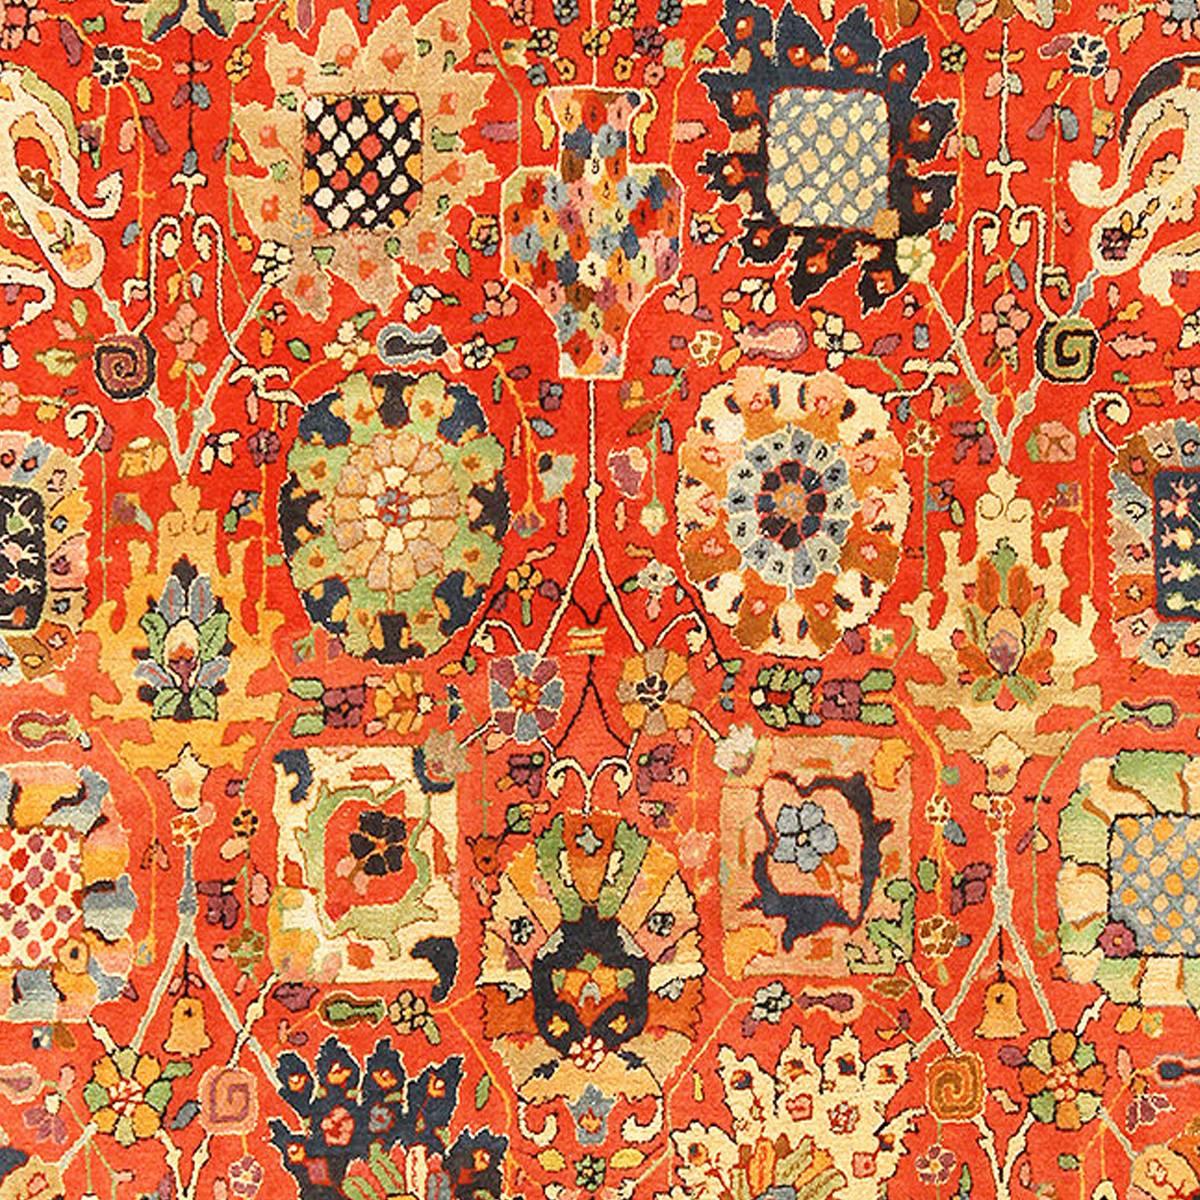 The art of rug-making, while traditionally associated with the East, is in fact a global practice that has been ongoing for centuries. Indeed, the history of rug-making in Western Europe is a rich and fascinating story, just as much so as the